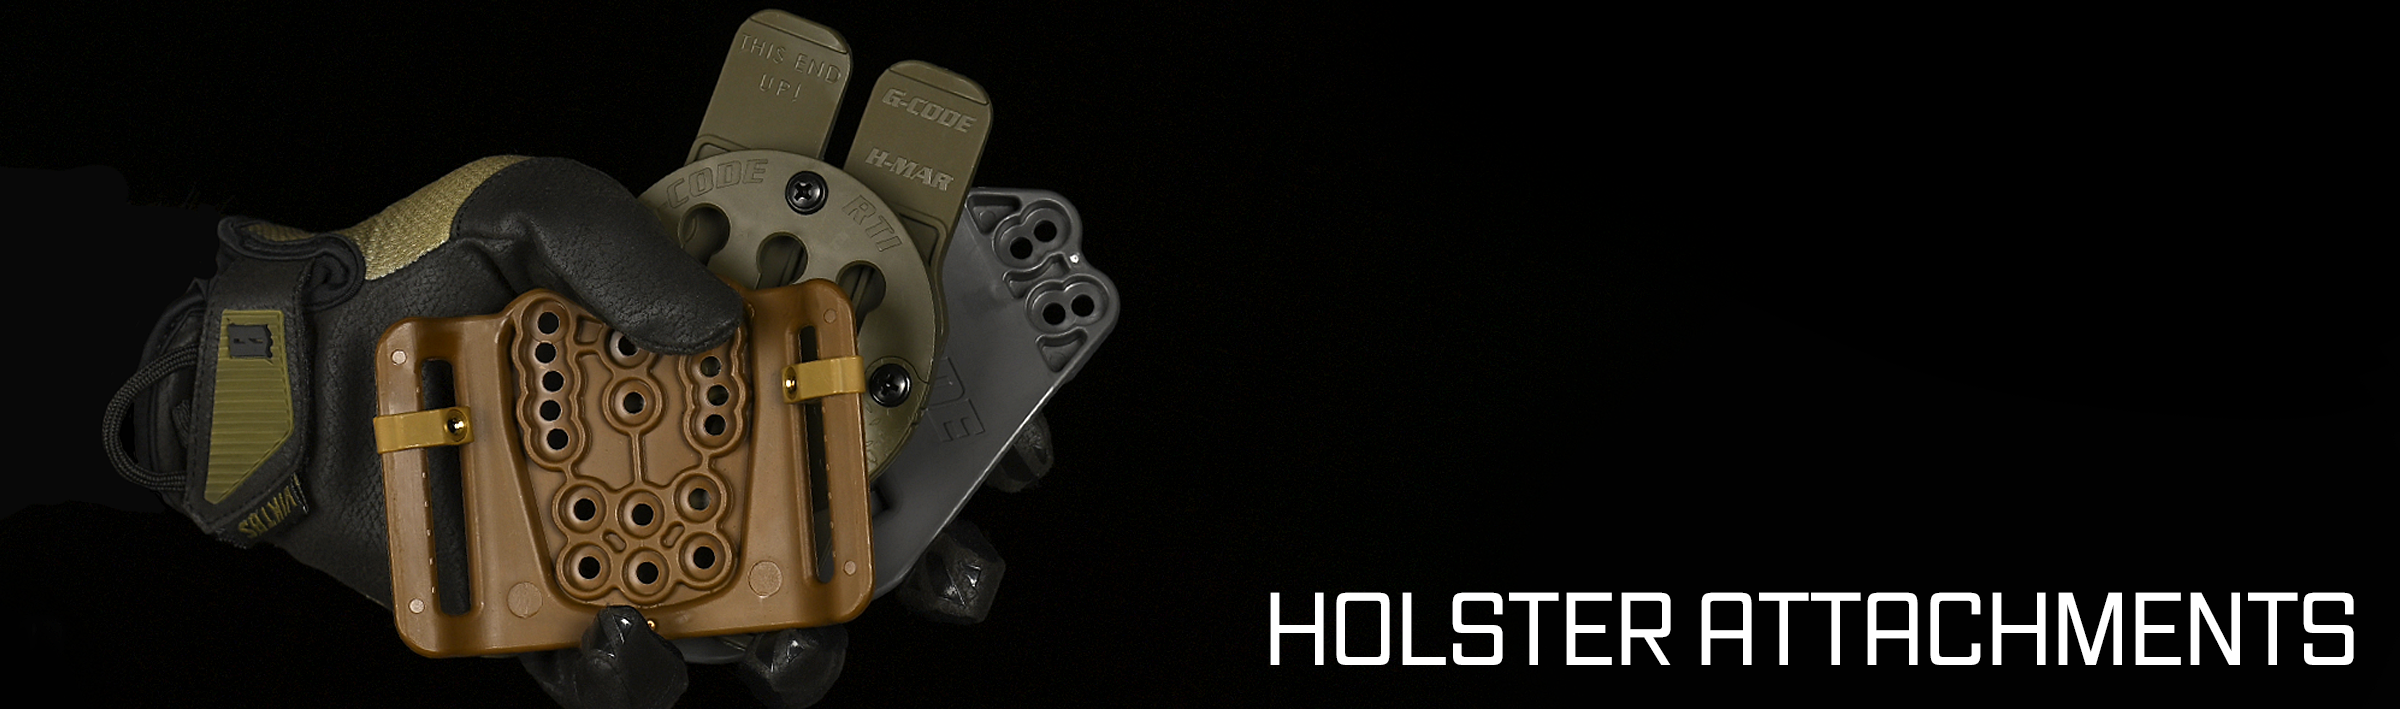 Attachments for Holsters